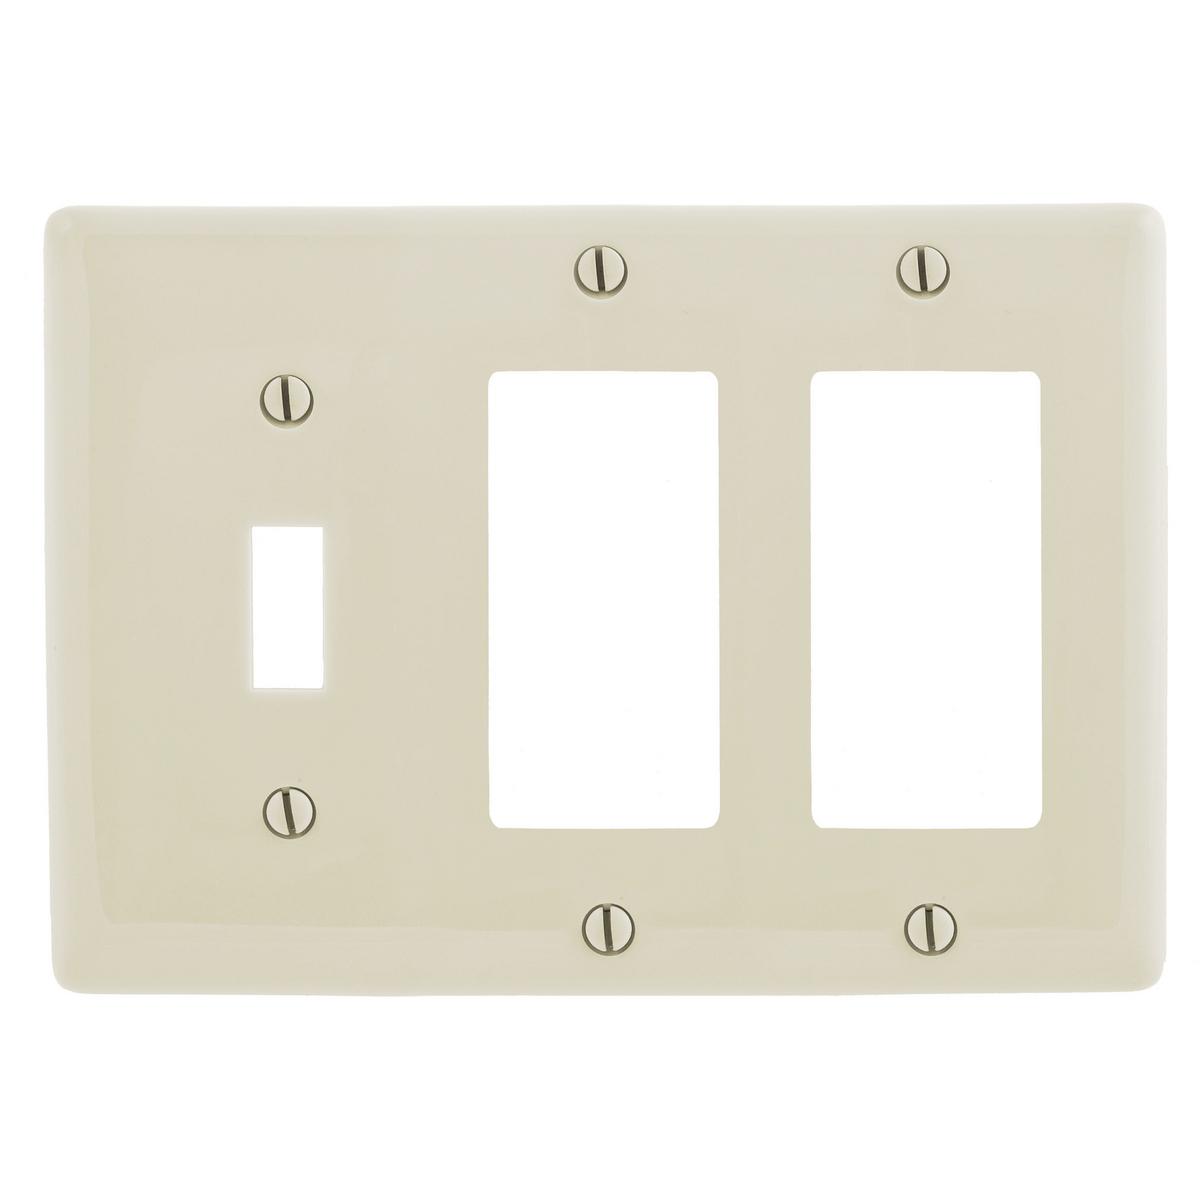 Hubbell NP1262LA Wallplates and Box Covers, Wallplate, Nylon, 3-Gang, 1) Toggle 2) Decorator, Light Almond  ; Reinforcement ribs for extra strength ; High-impact, self-extinguishing nylon material ; Captive screw feature holds mounting screw in place ; Standard Size is 1/